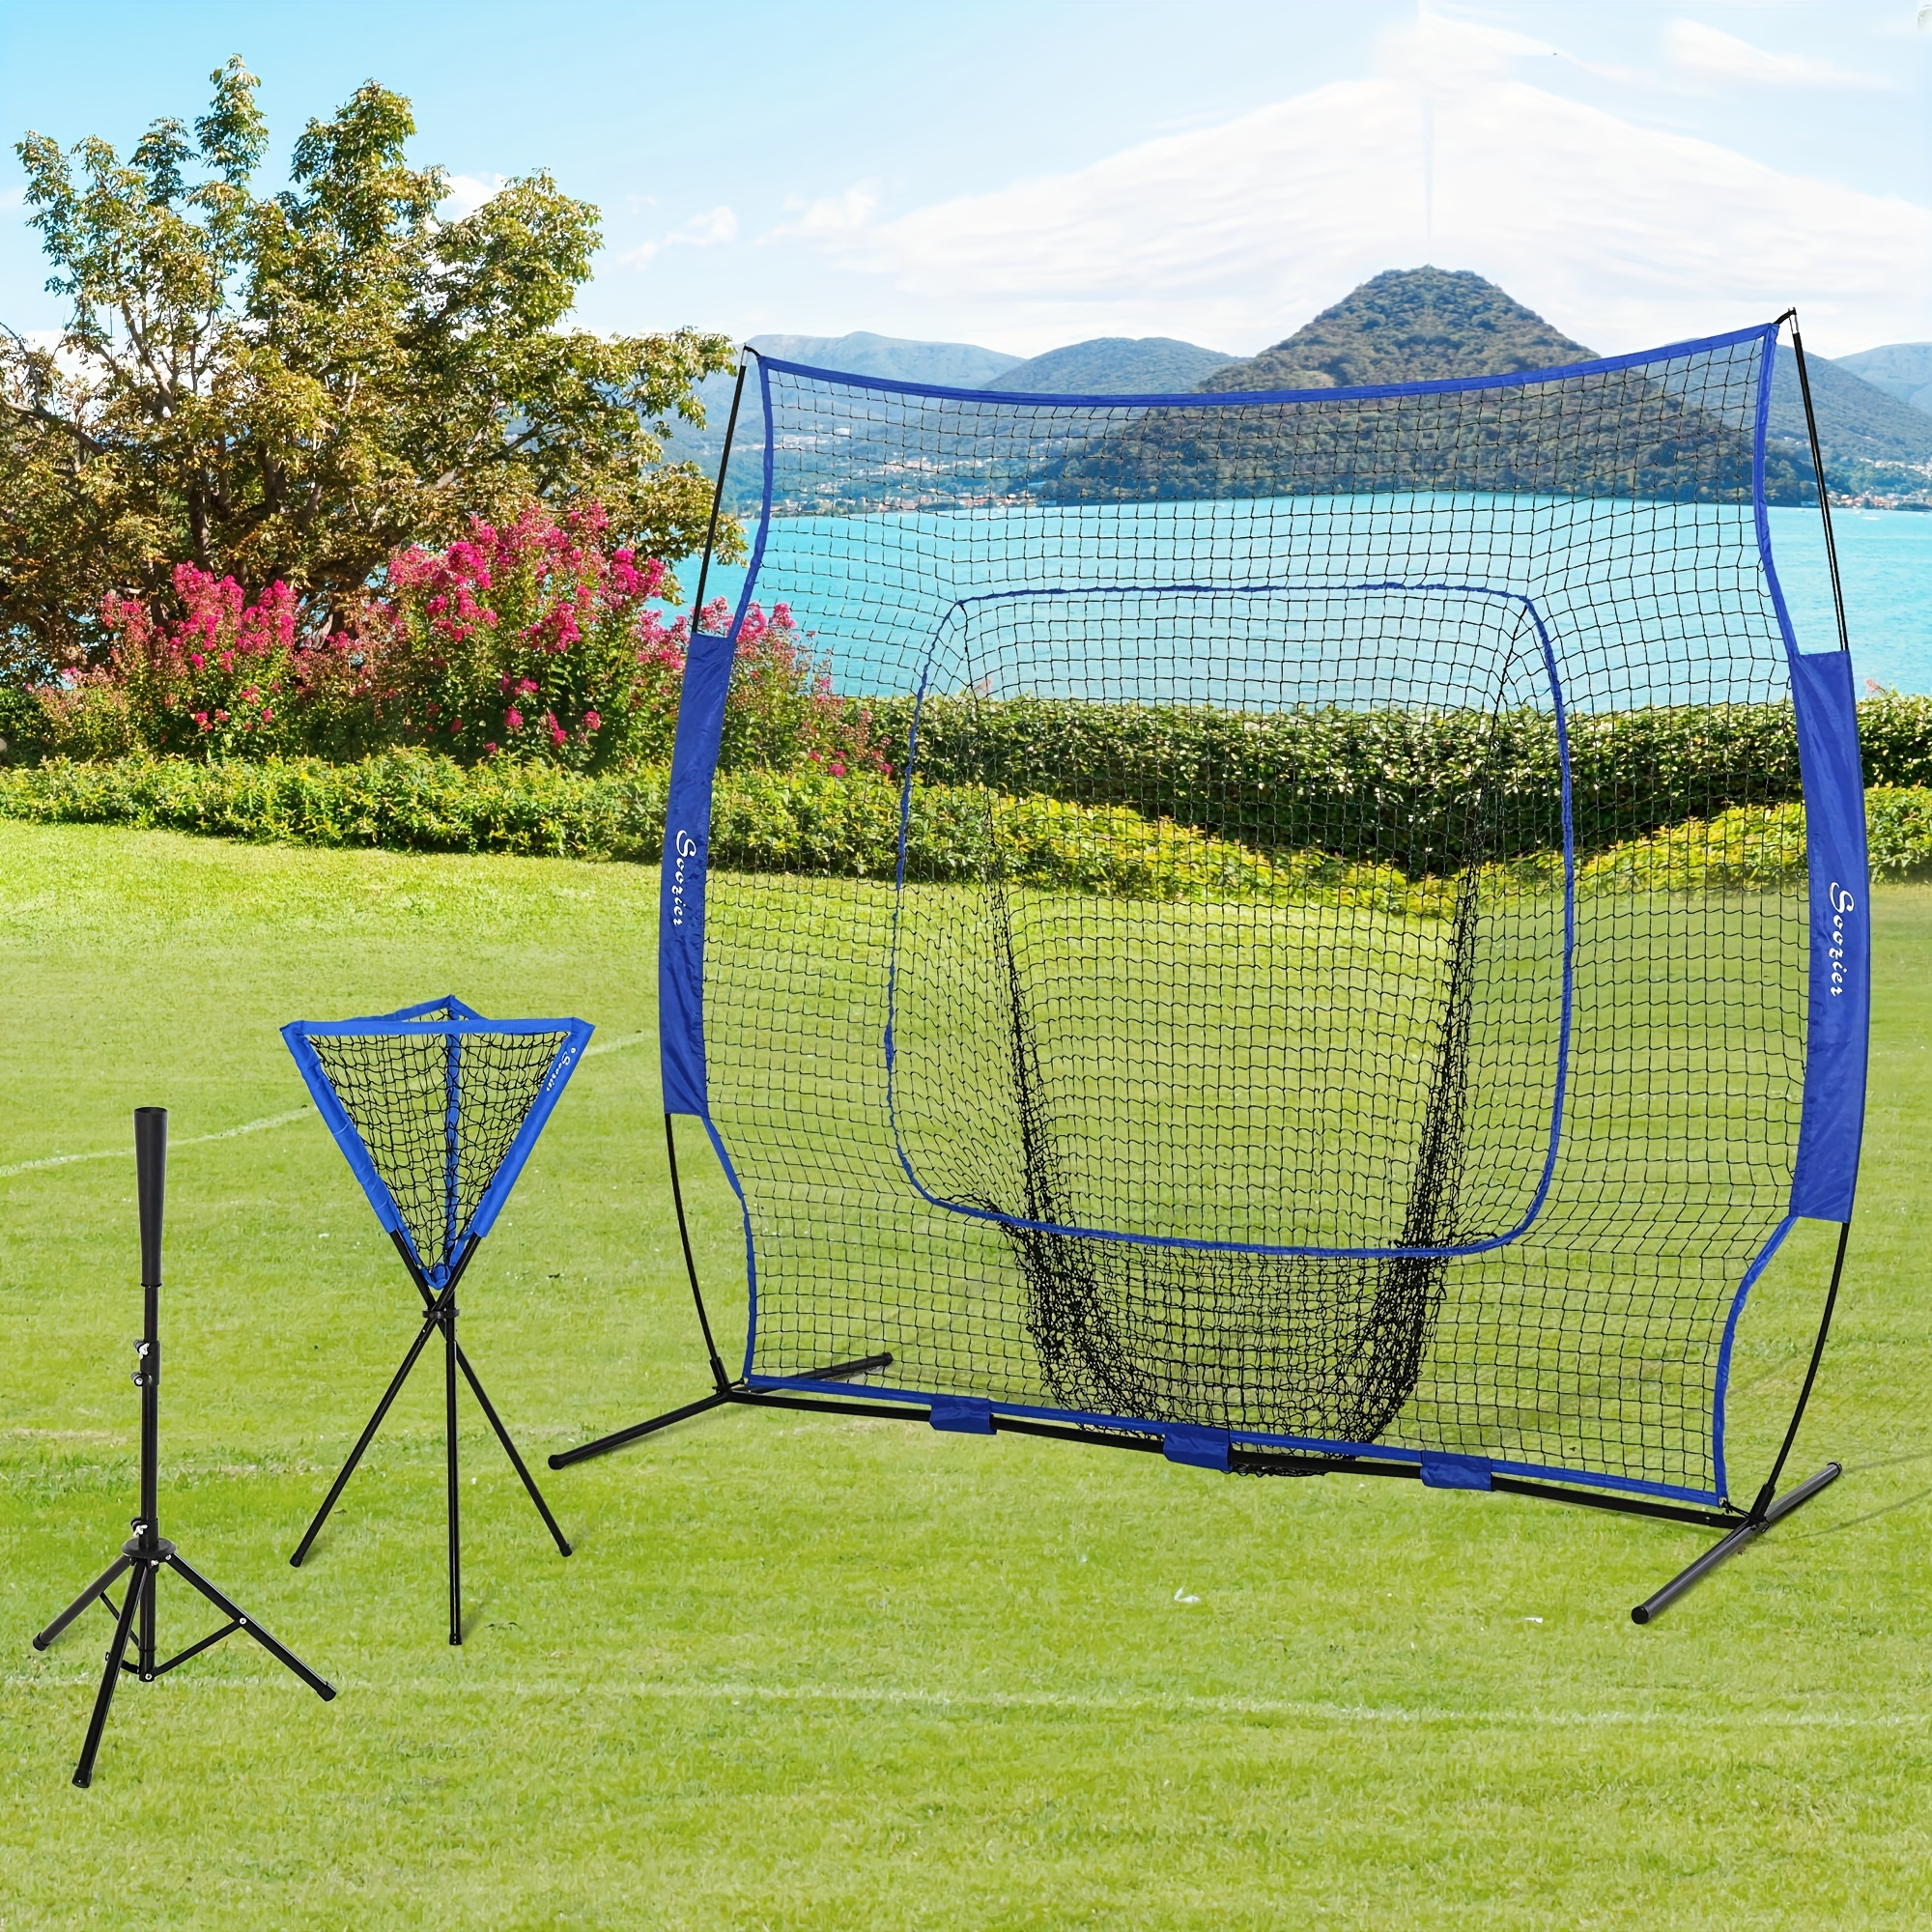 

Soozier Baseball Practice Net Set With 7.5x7ft Catcher Net, Ball Caddy, Portable Baseball Practice Equipment With For Hitting, Pitching, Batting, Catching, Blue